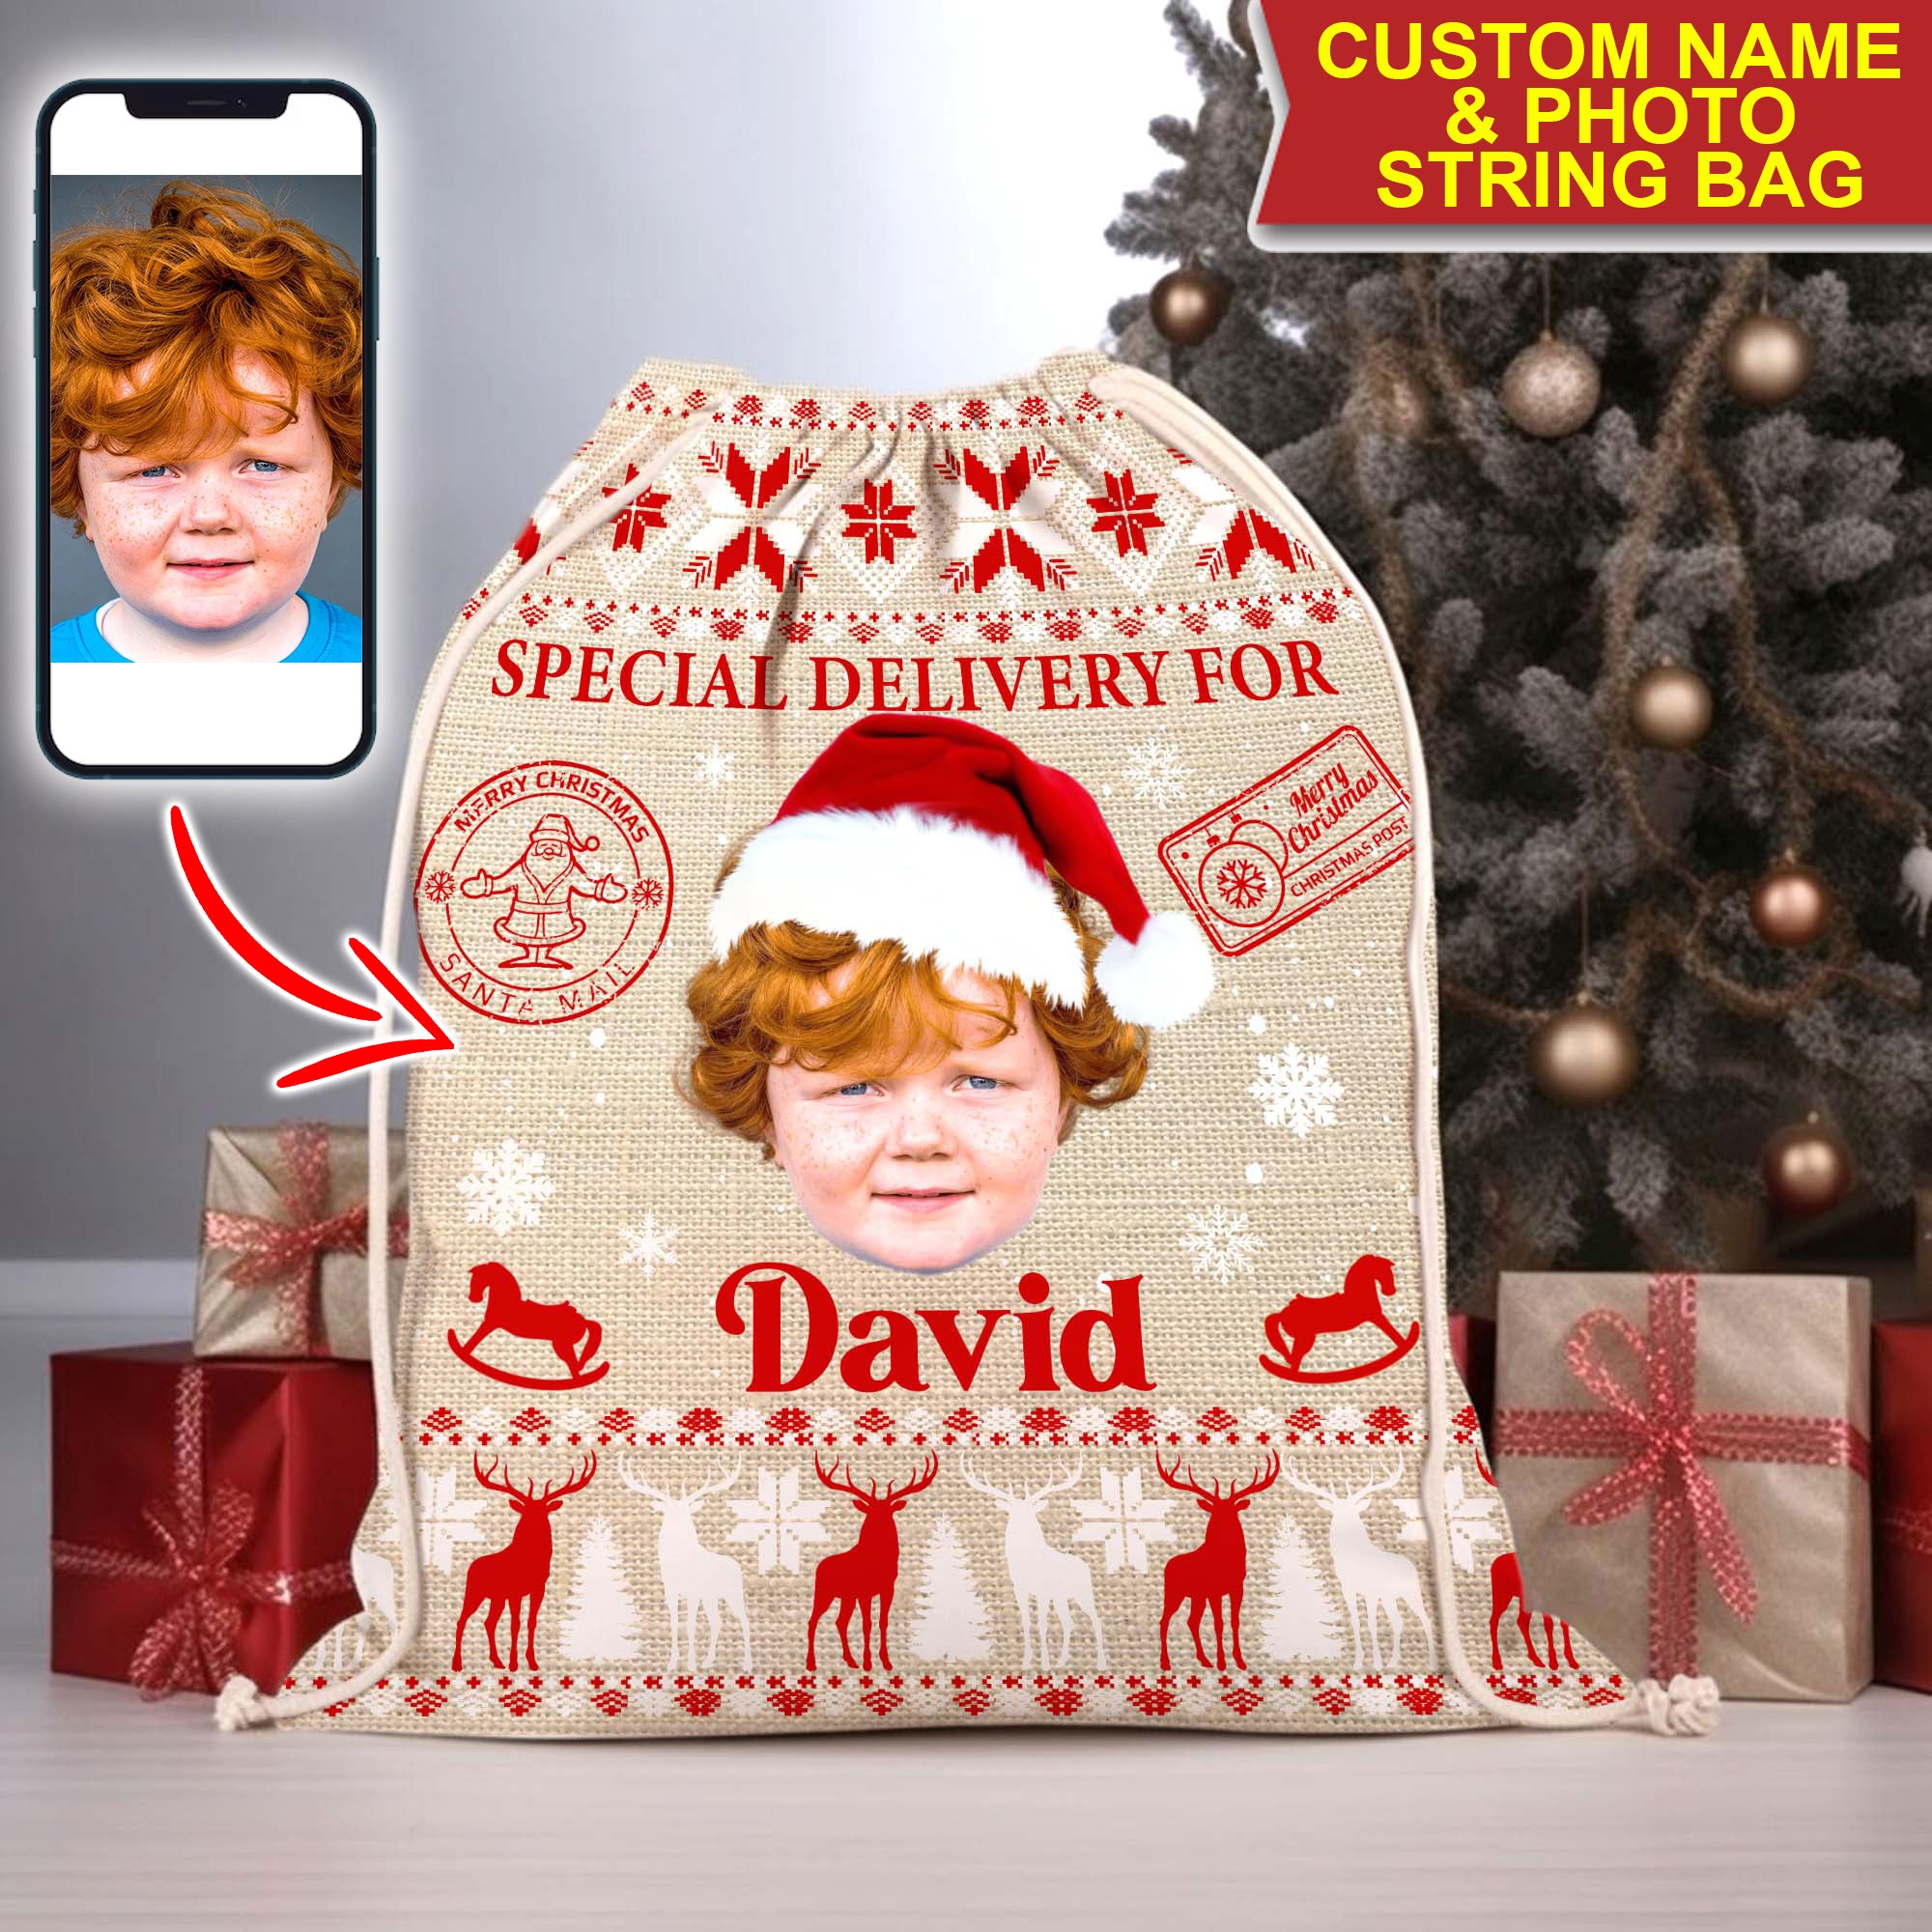 Special Delivery For Kid - Personalized Head Photo And Name String Bag, Christmas Gift, Gift For Family